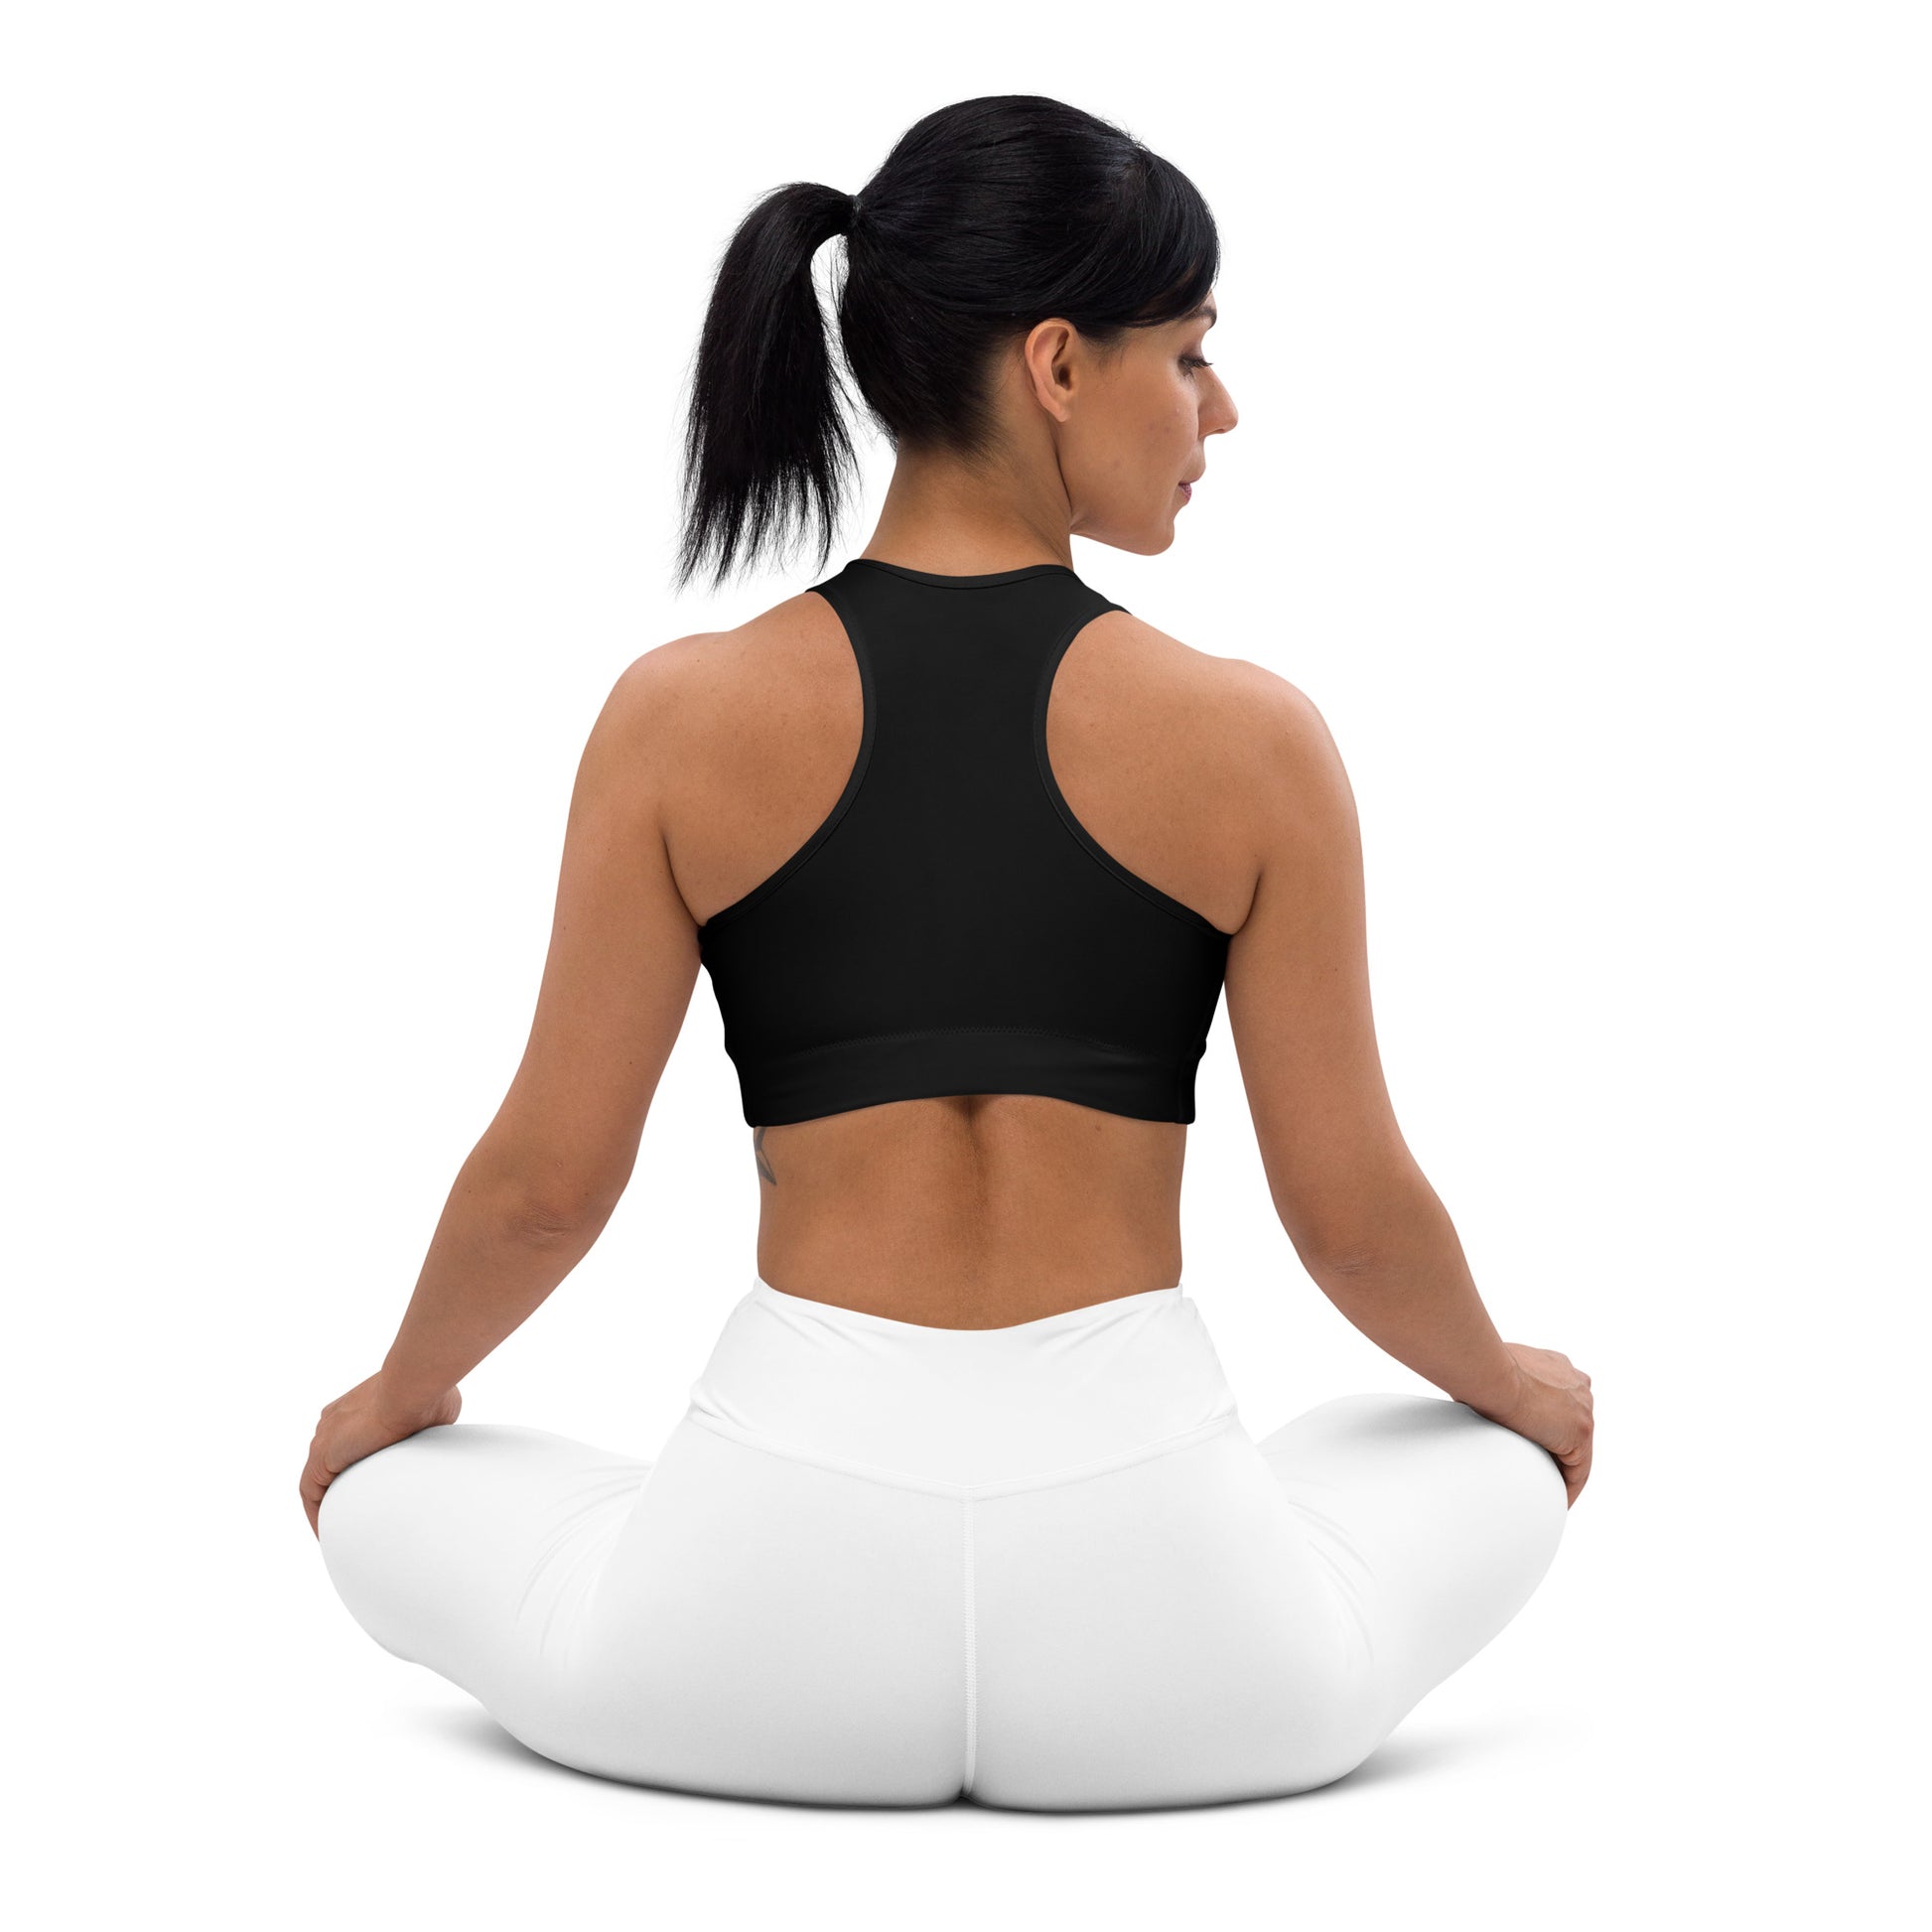 A picture of a women on the floor in a yoga pose wearing a Black padded sports bra - crop top - back side